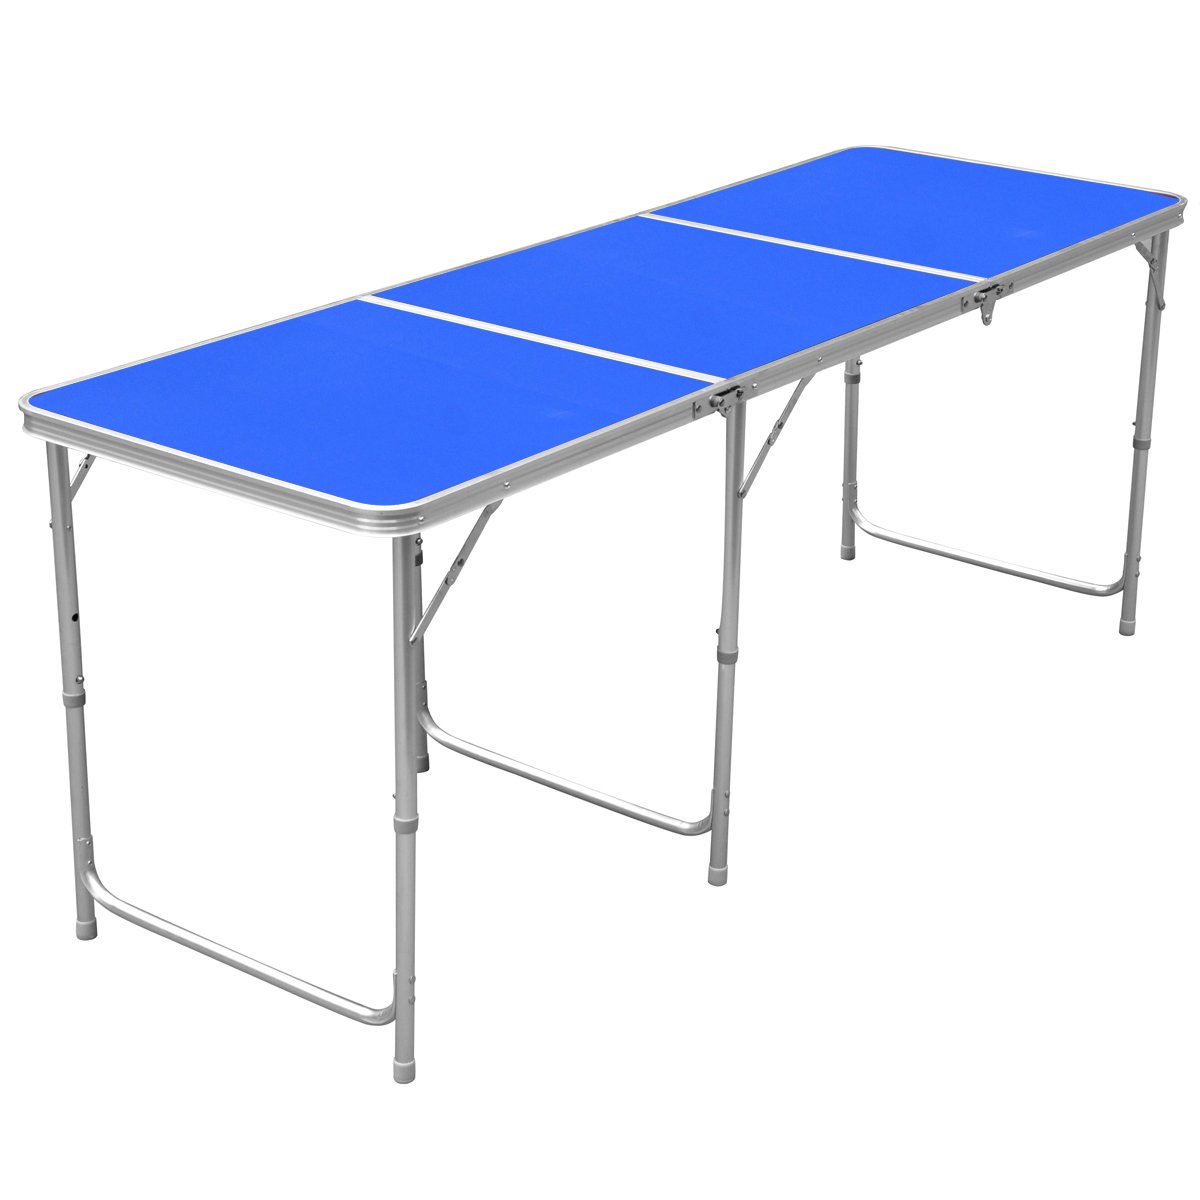 1.8m/6ft Aluminum Portable Folding Camping Picnic Party Dining Table -SH